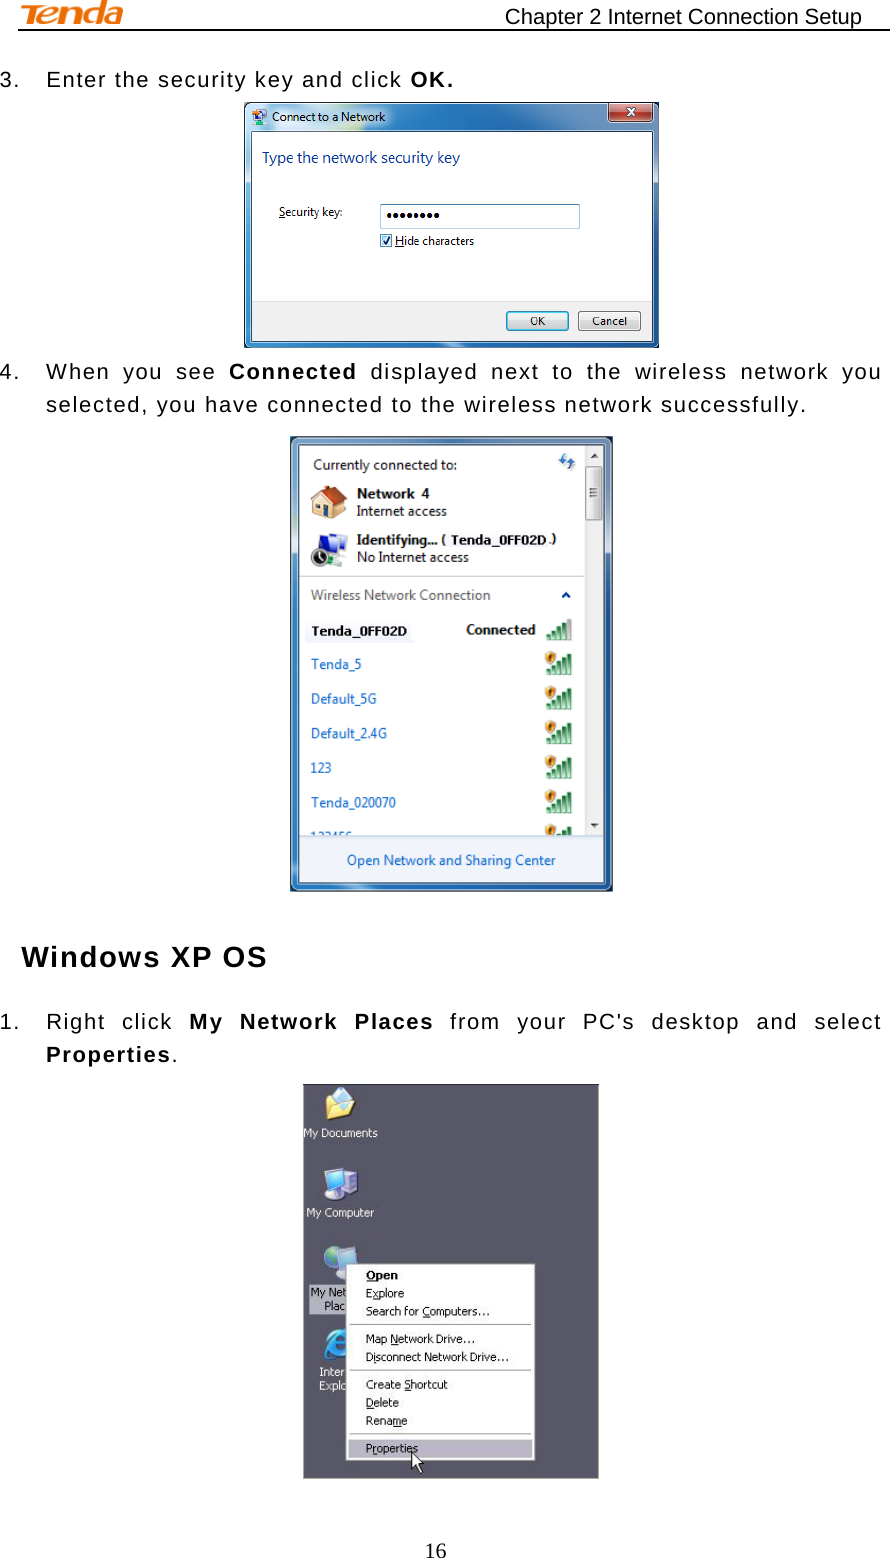                                    Chapter 2 Internet Connection Setup 16 3. Enter the security key and click OK.  4. When you see Connected displayed next to the wireless network you selected, you have connected to the wireless network successfully.  Windows XP OS 1. Right click My Network Places from your PC&apos;s desktop and select Properties.  